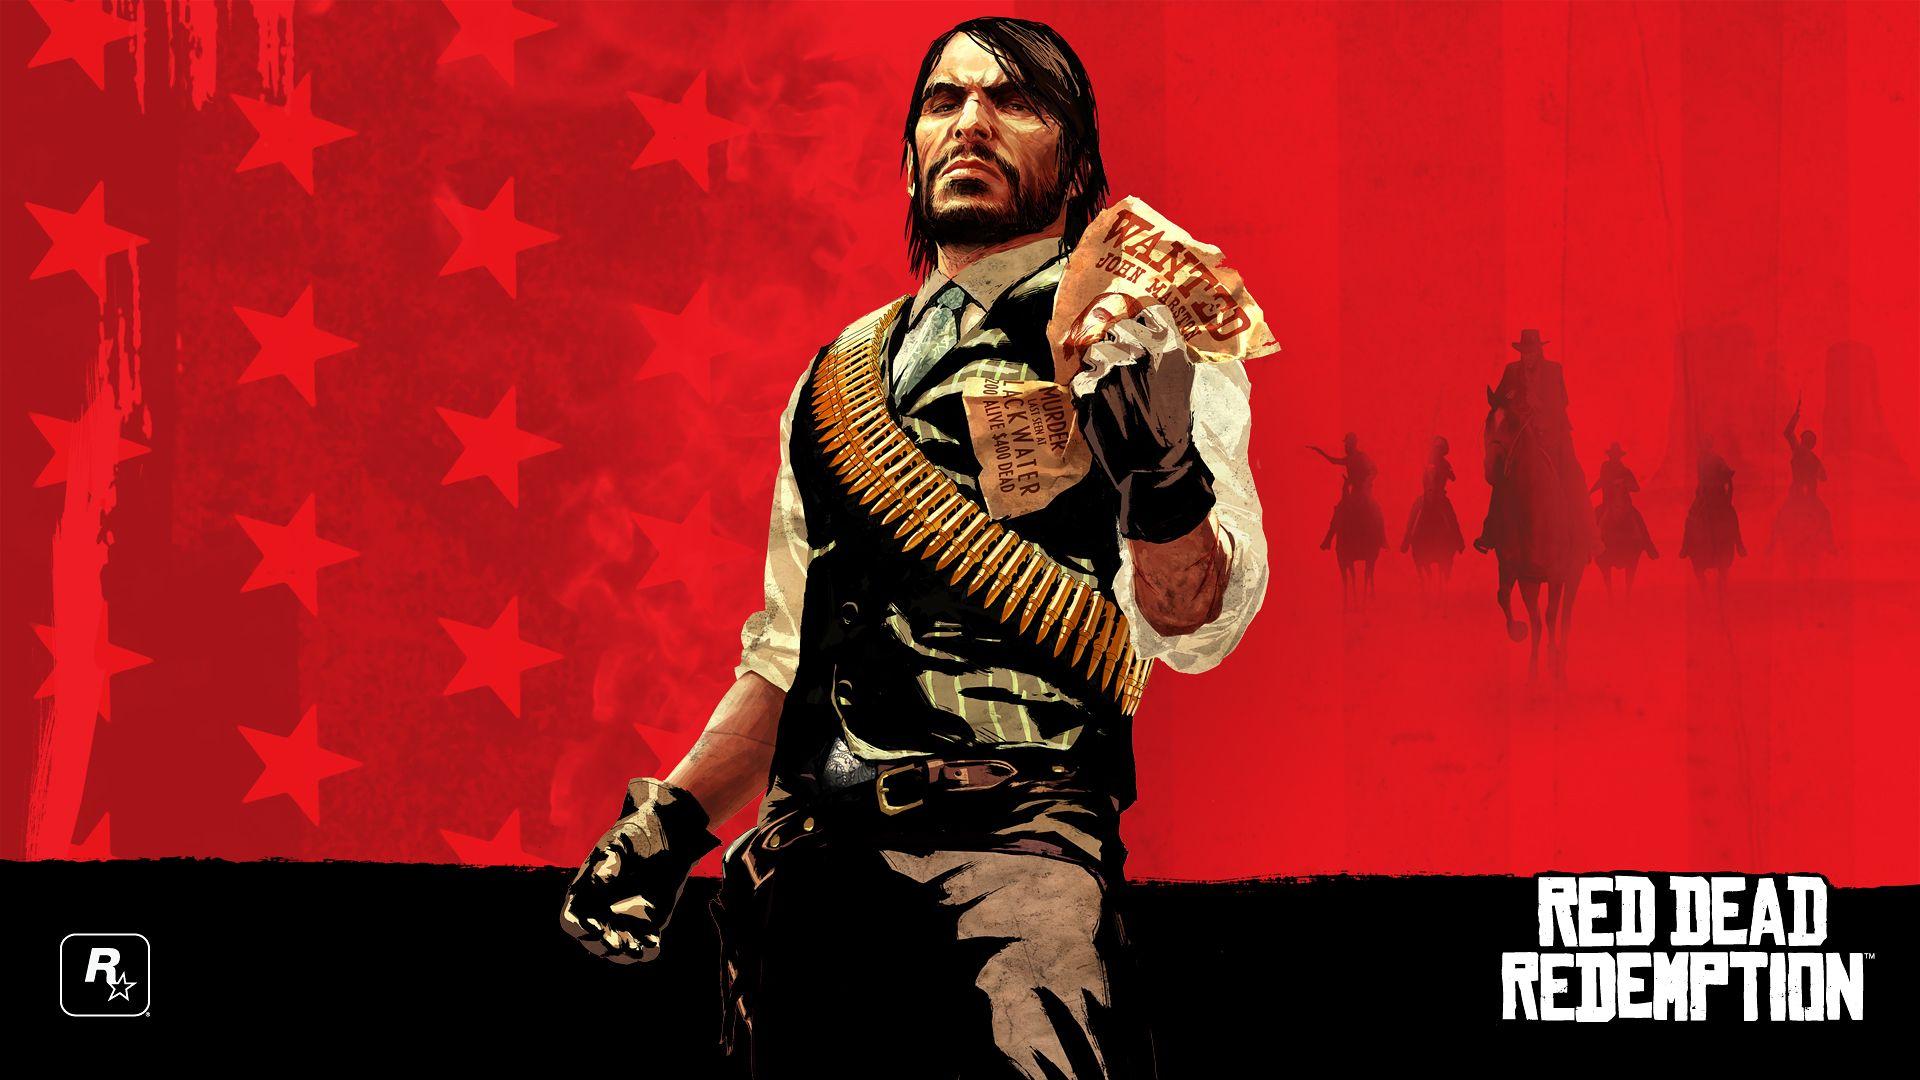 Red Dead Redemption wallpaper, Video Game, HQ Red Dead Redemption